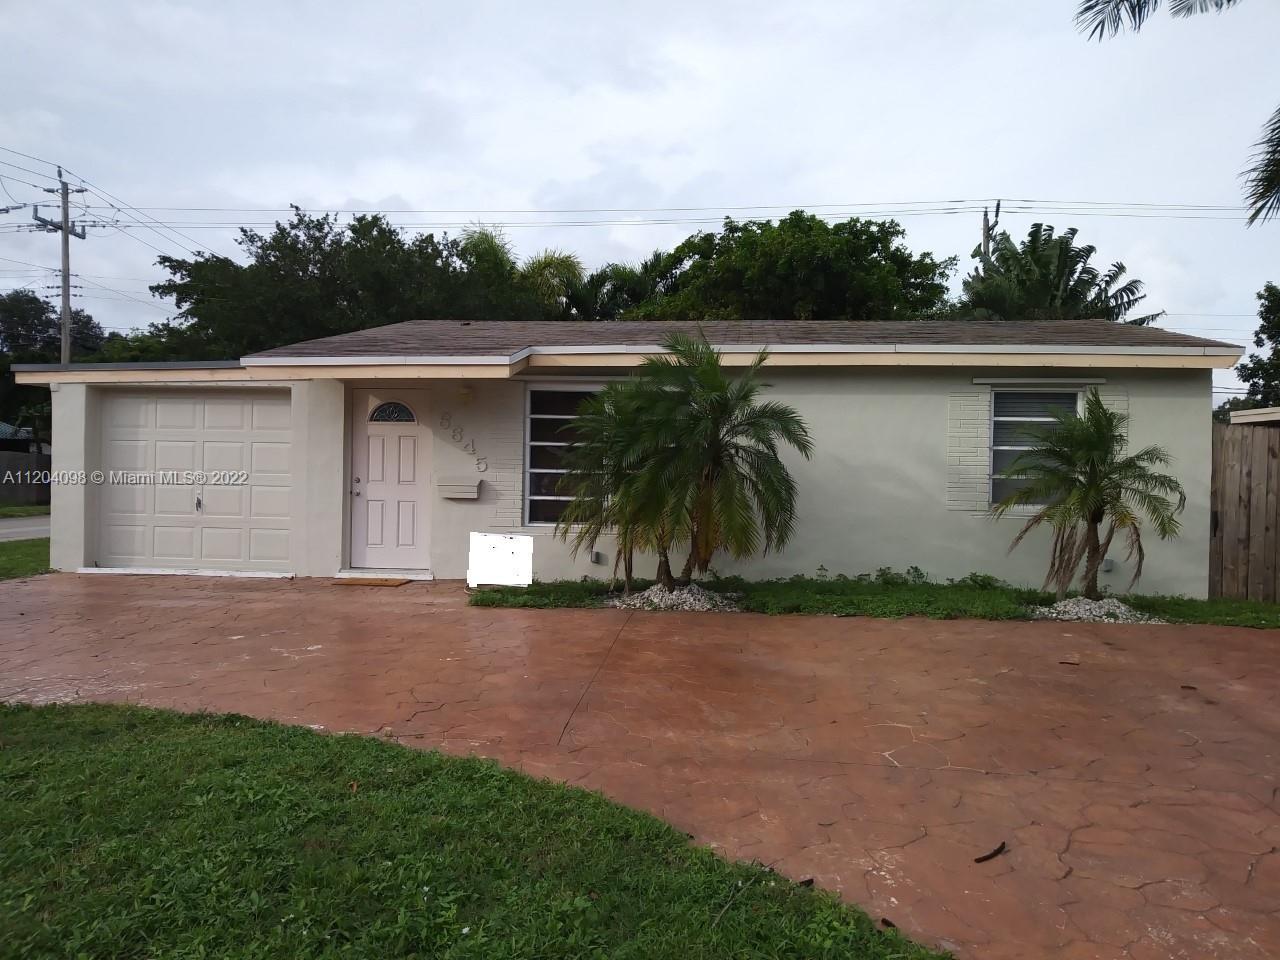 Great 3/1 house with Detached Build Steel Garage that is fully permitted for multiple uses. Remodele